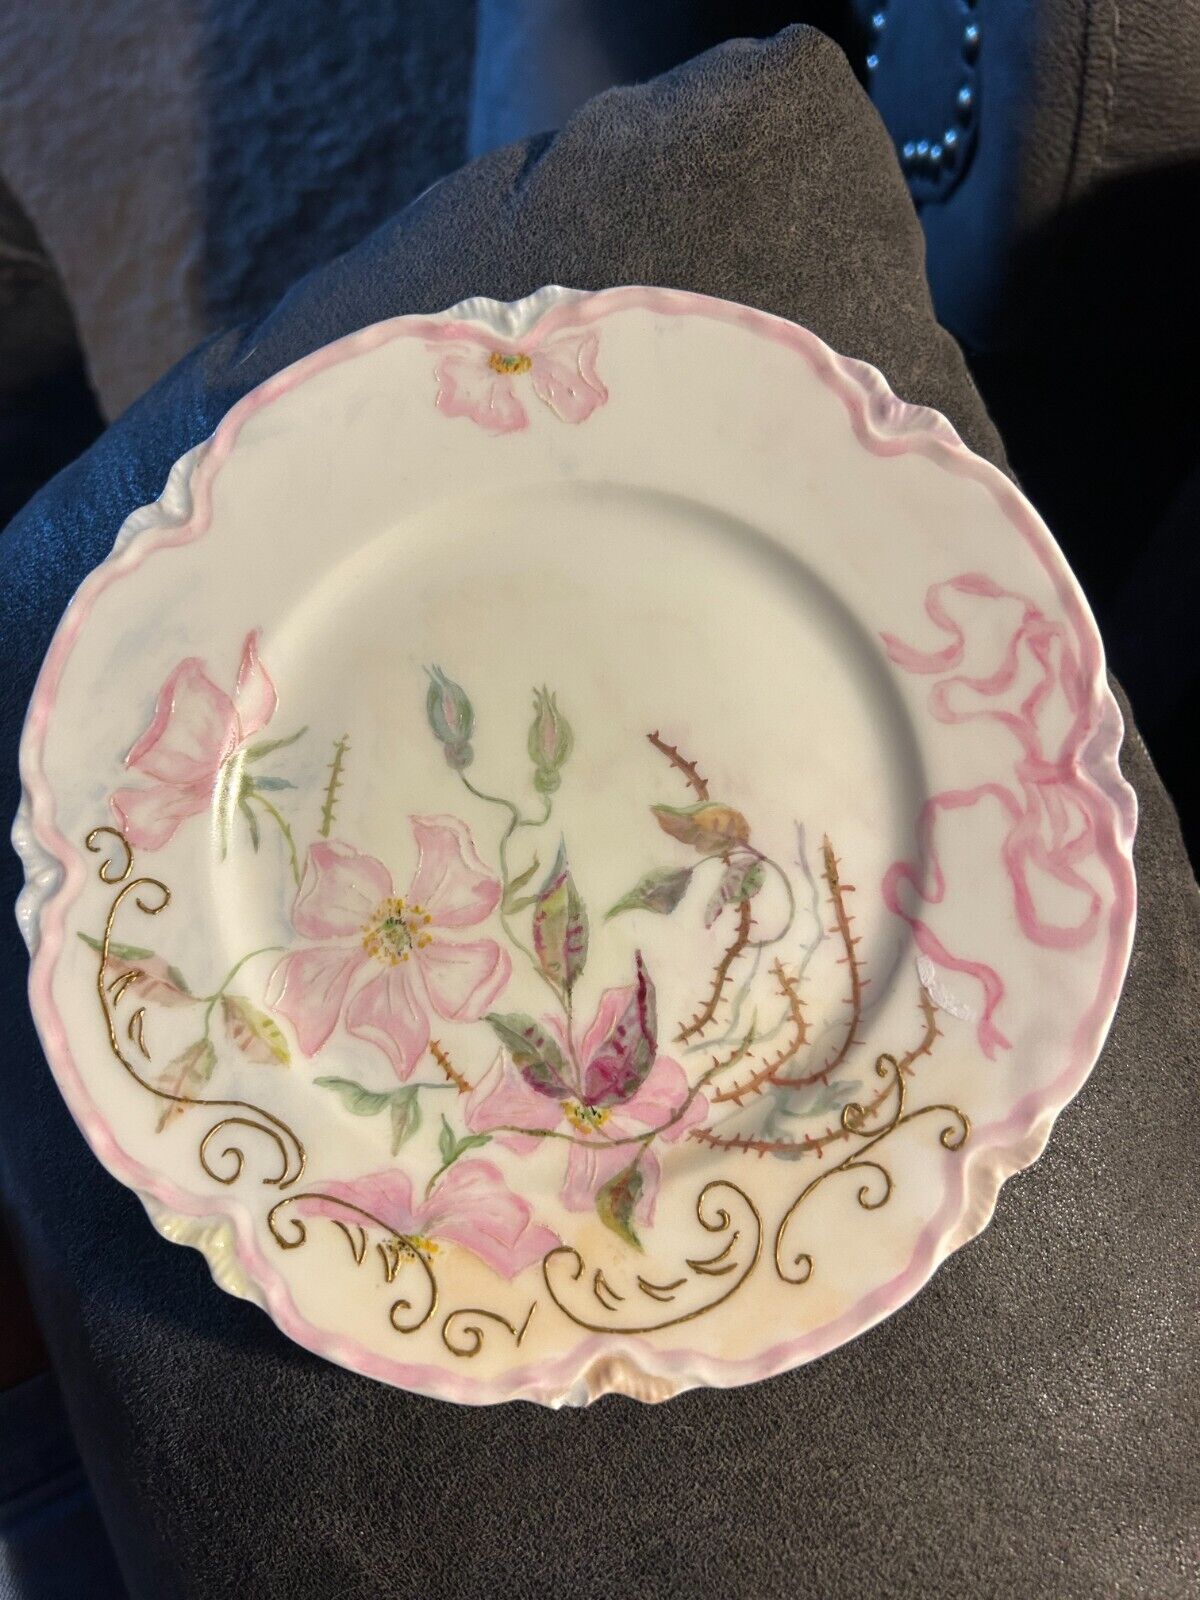 Antique Tea Plate Made in France. Pink Flowers and Ribbon